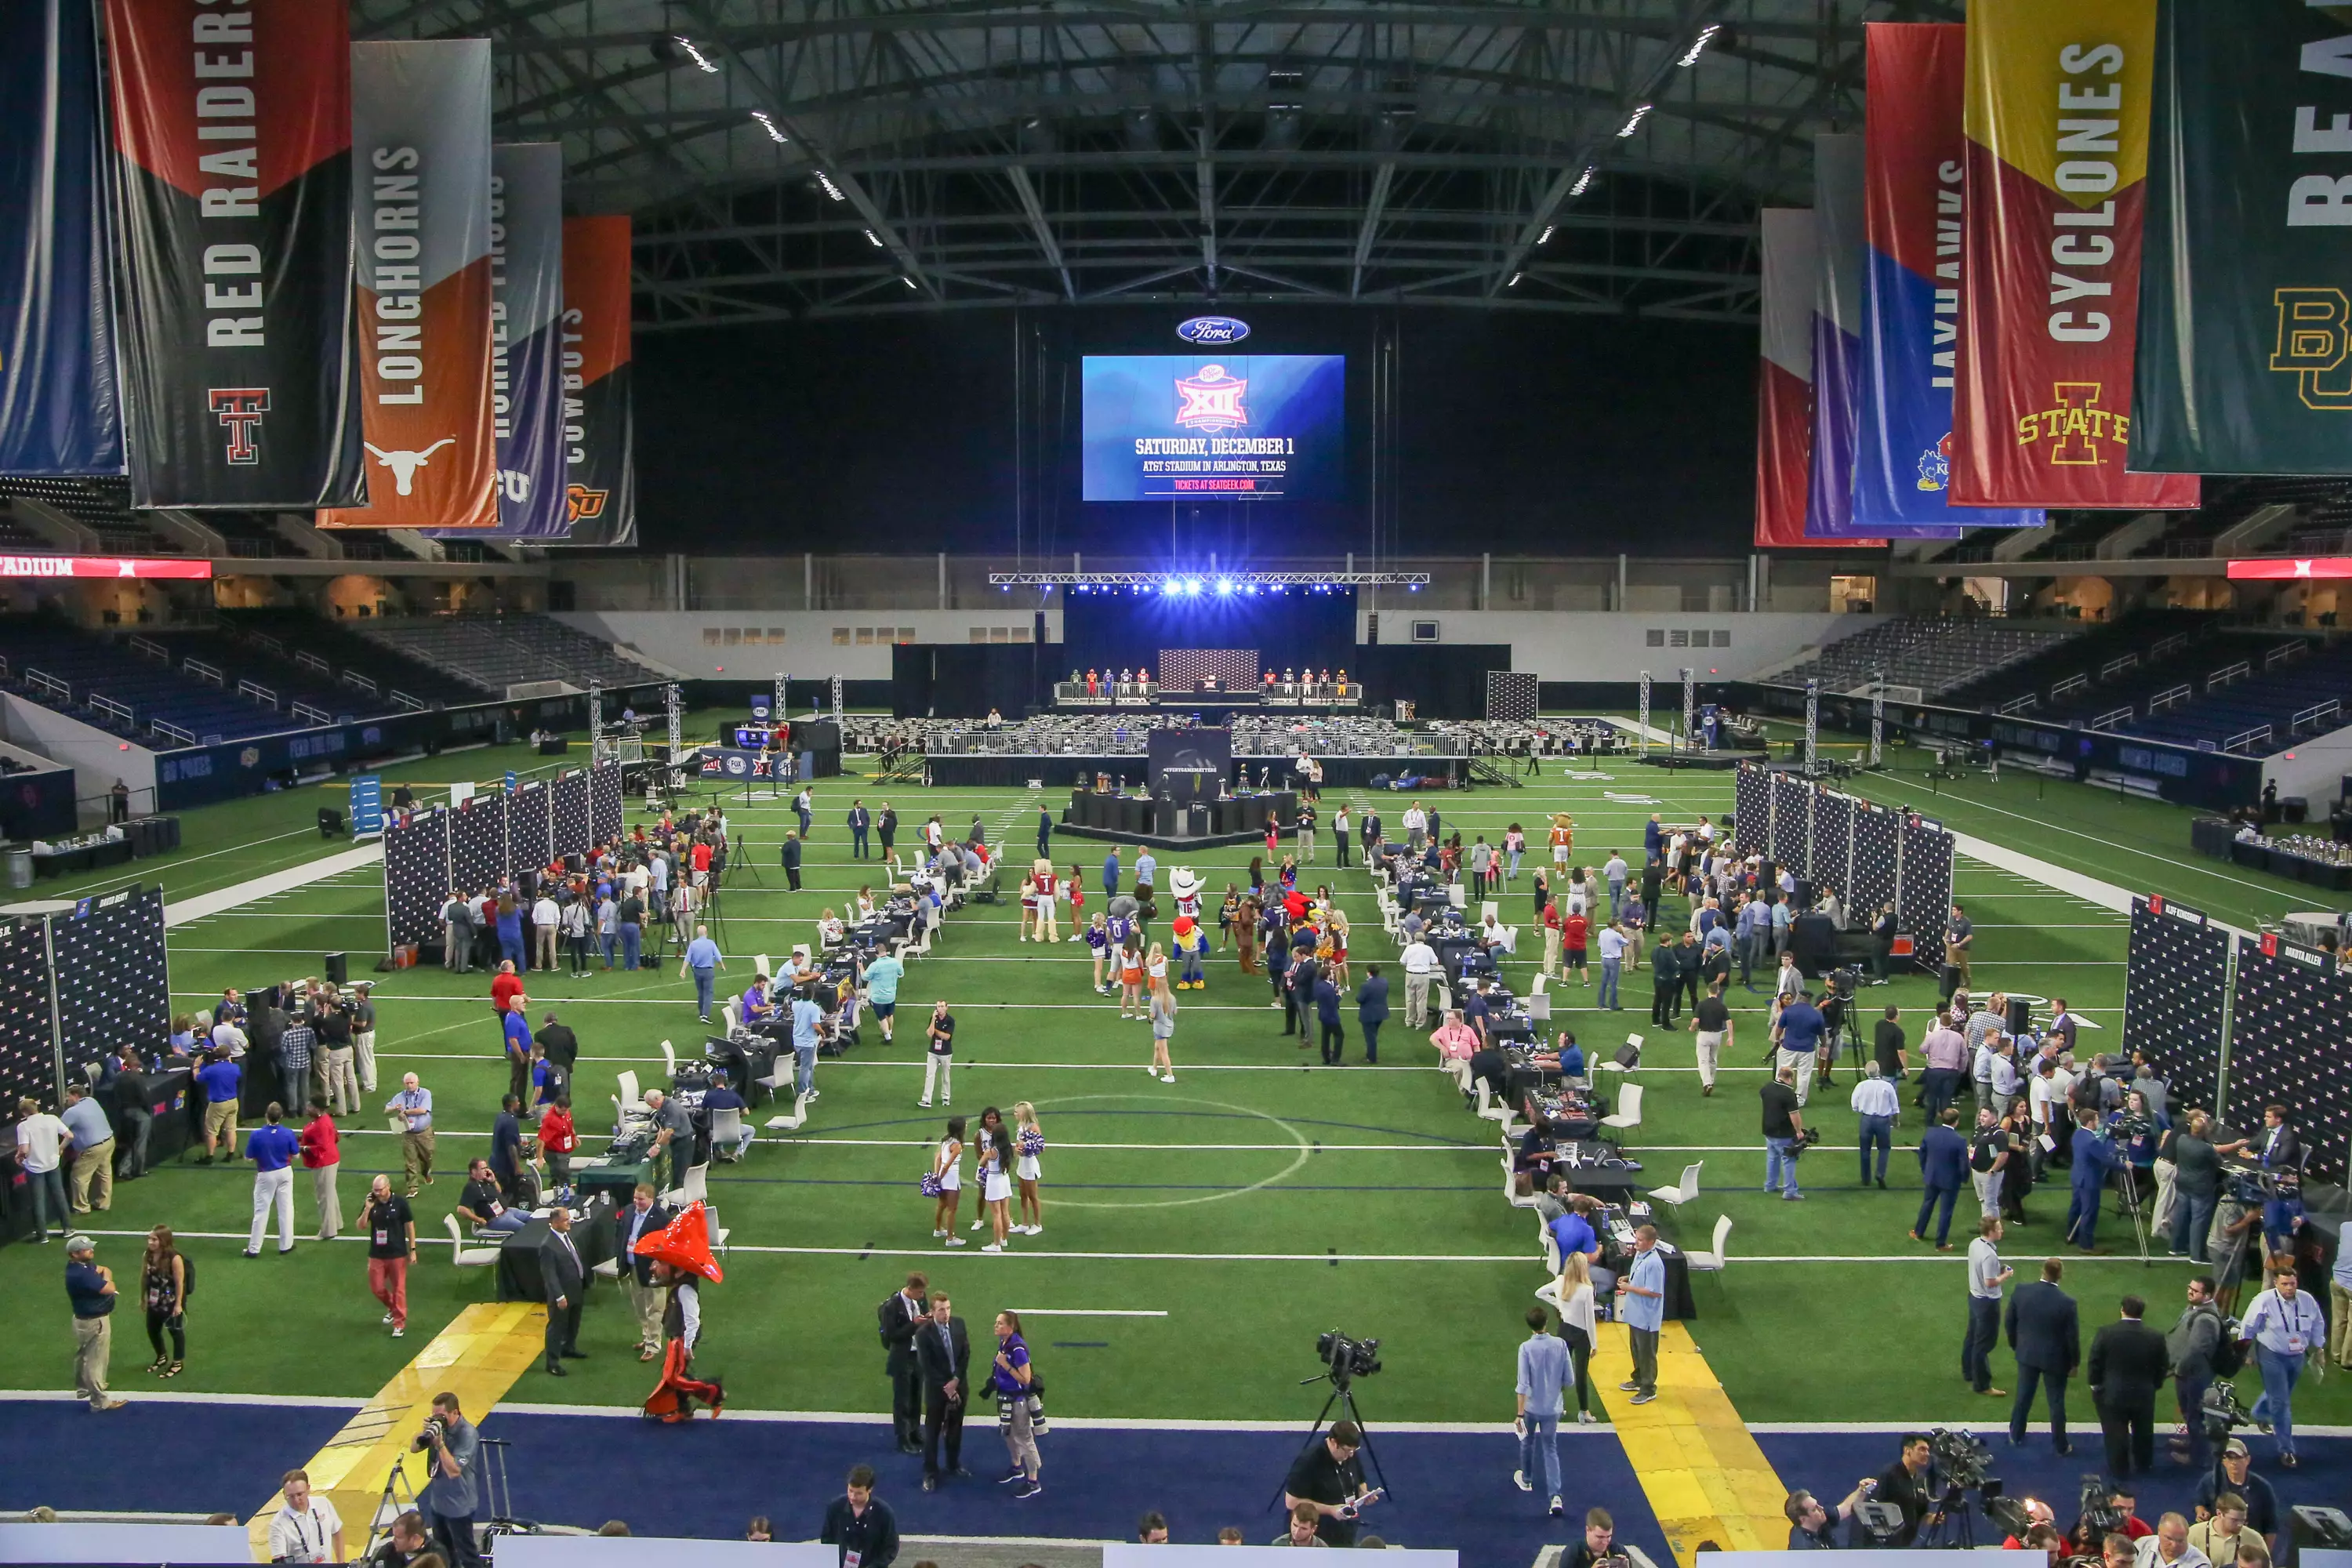 The Star in Frisco, Texas cost $1.5bn to build and has a 12,000-seat stadium inside